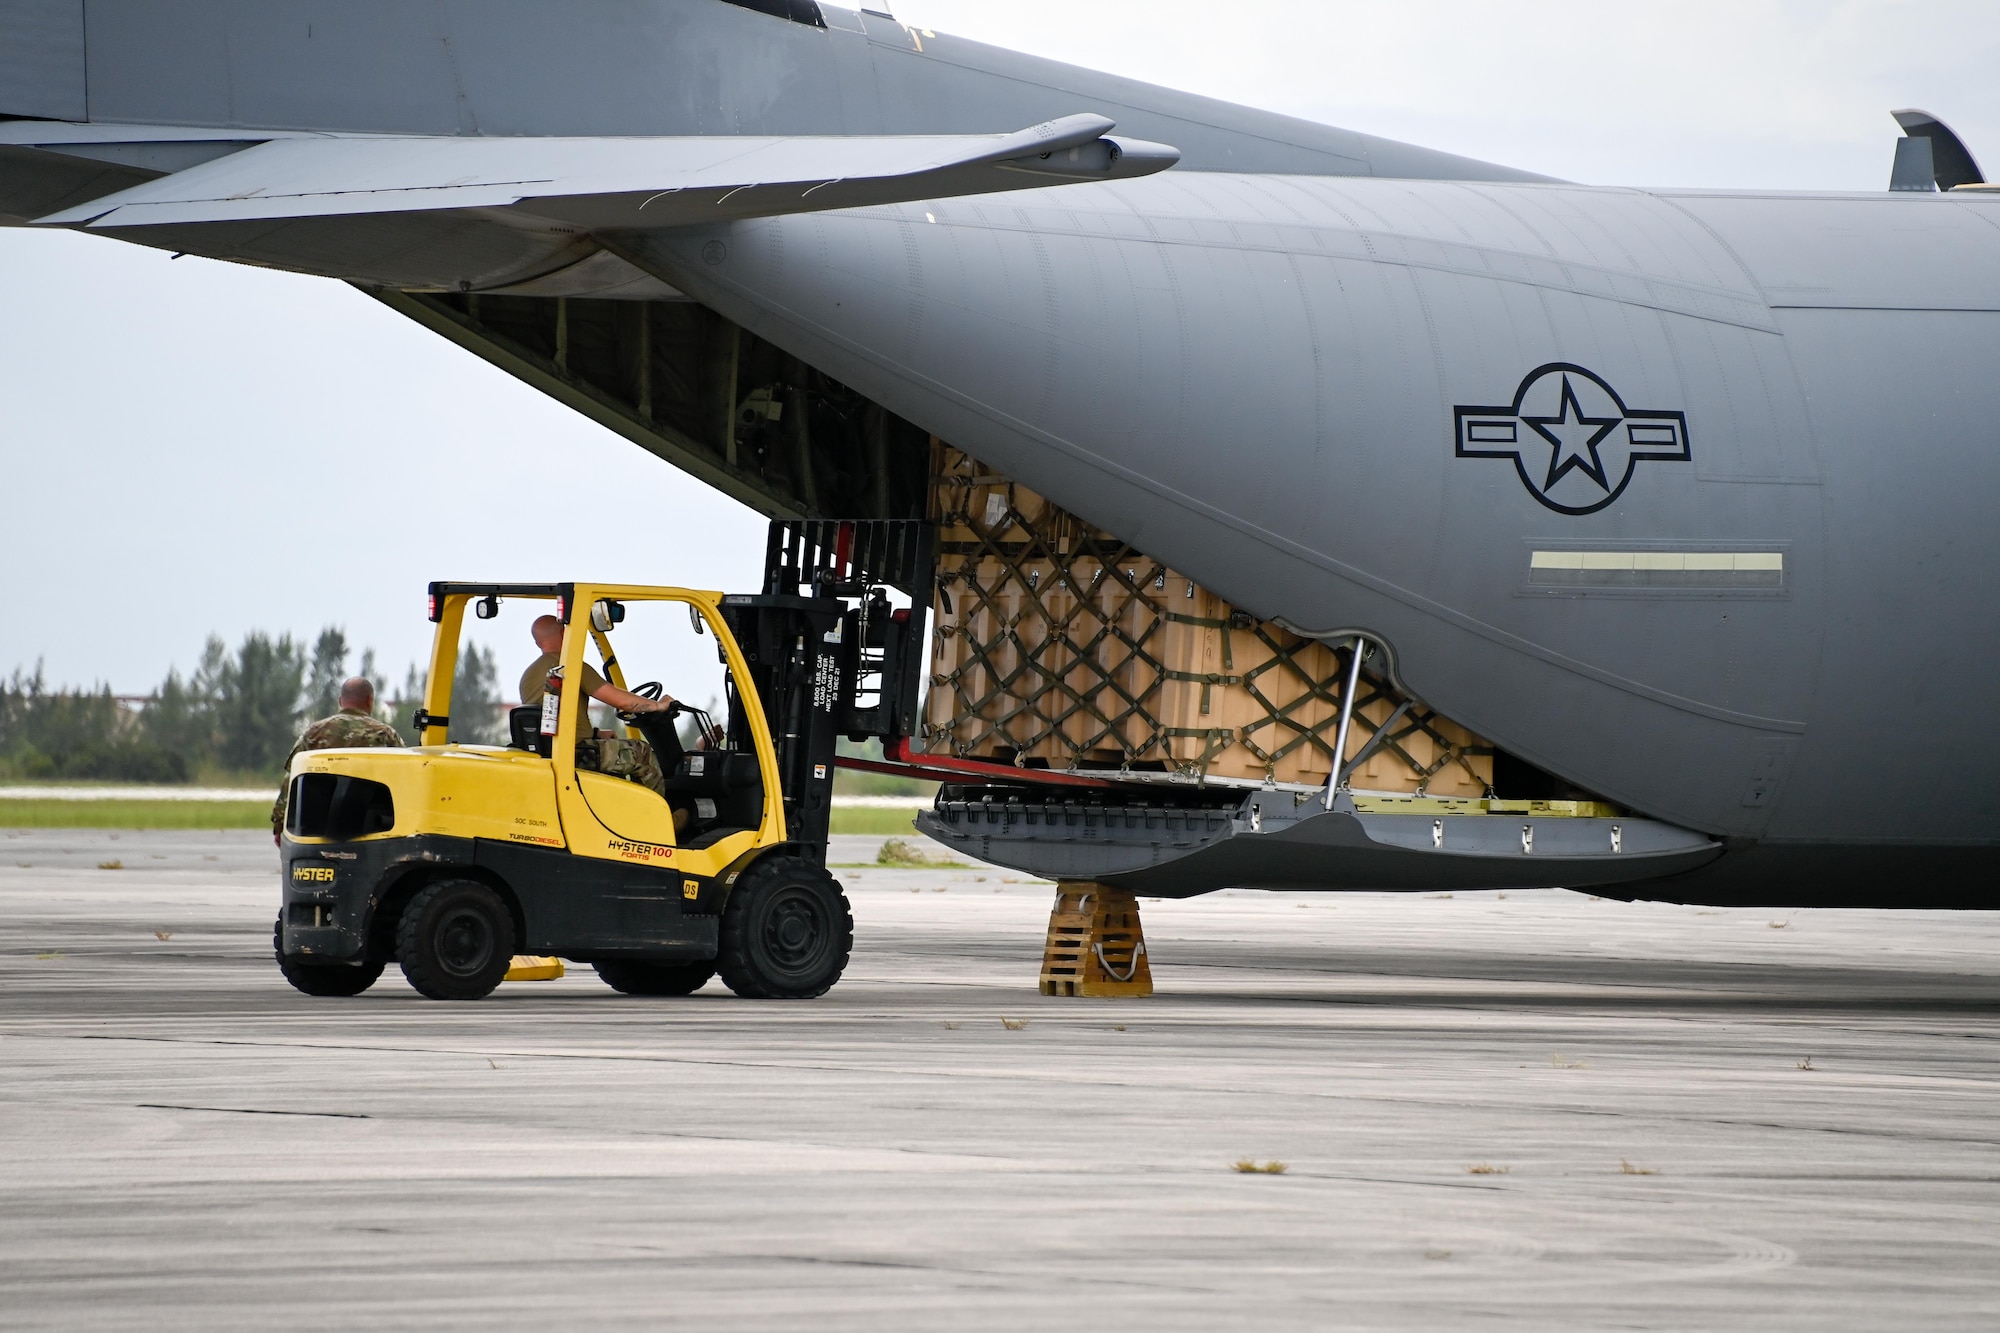 Image of supplies being loaded into aircraft.